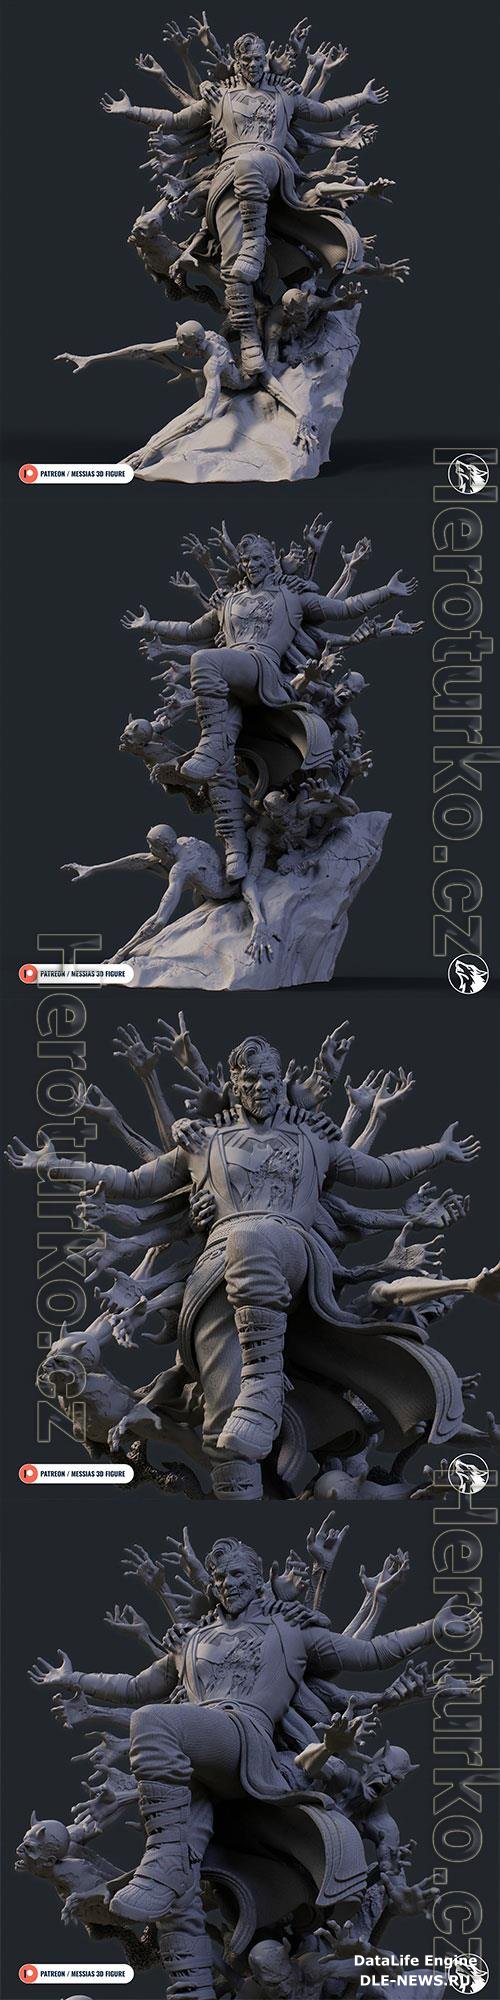 3D Print Doctor Strange in the Multiverse of Madness